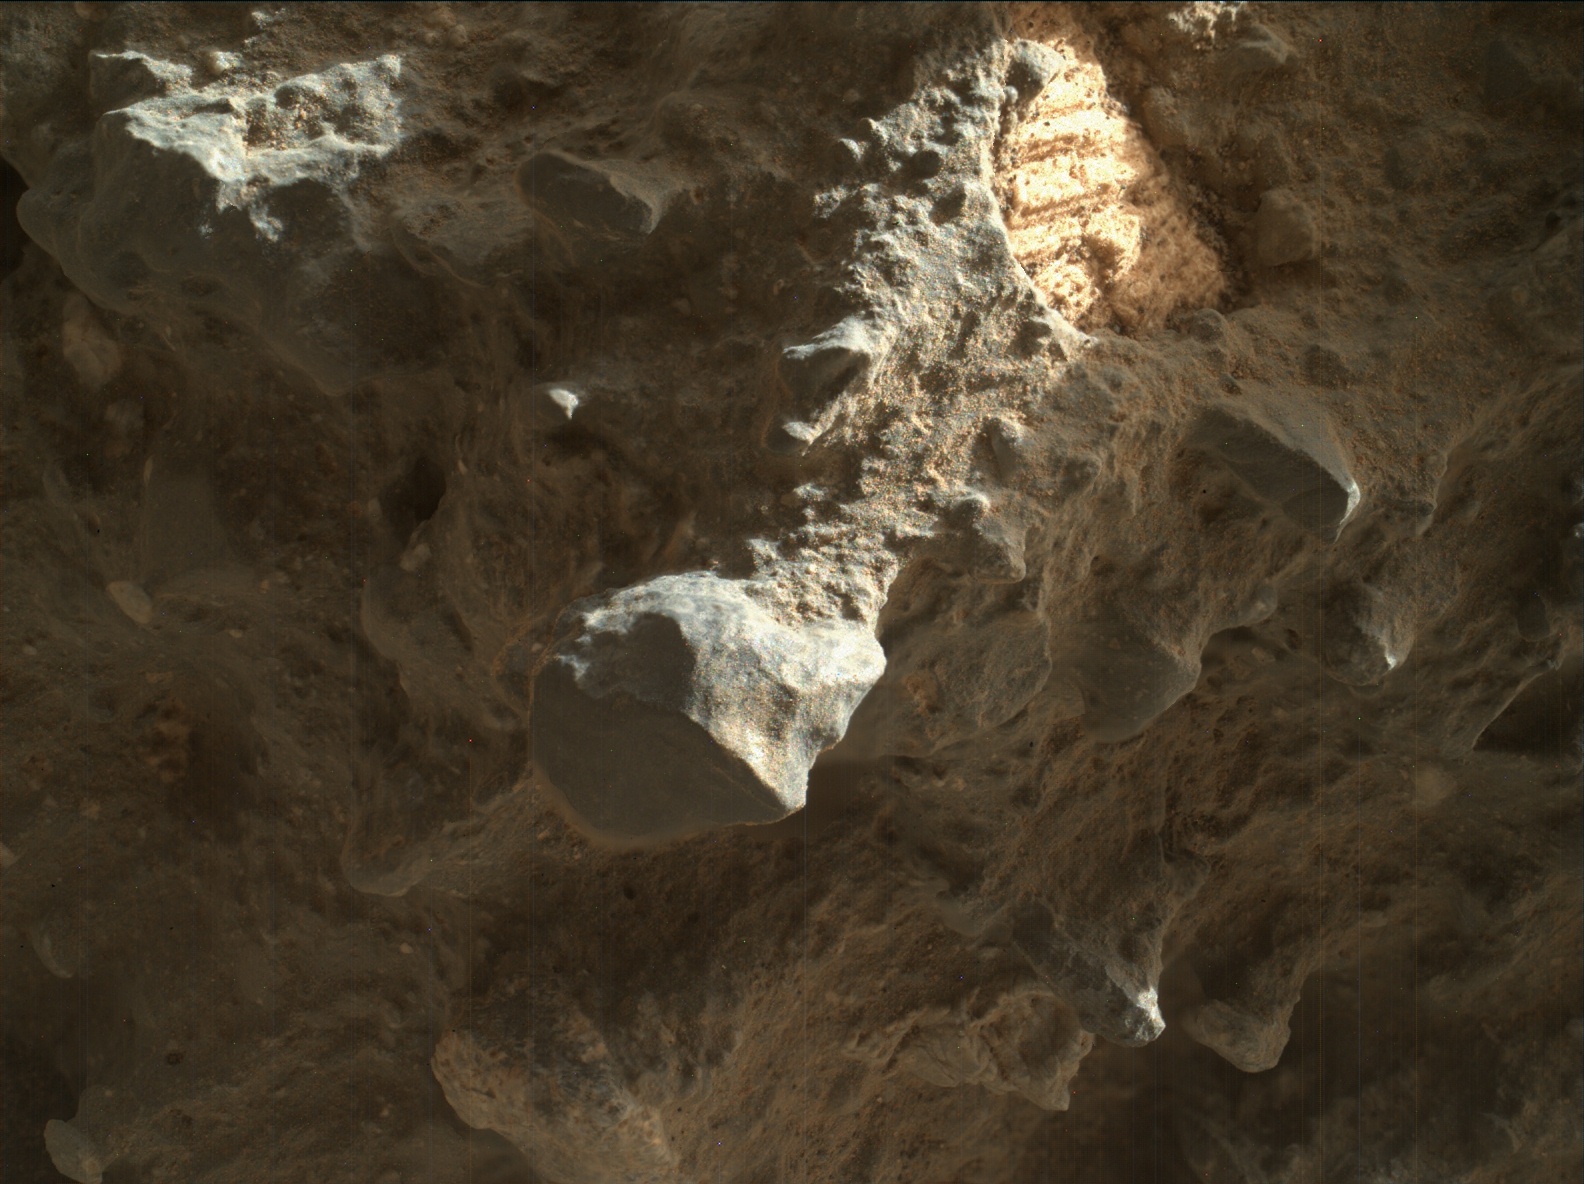 Nasa's Mars rover Curiosity acquired this image using its Mars Hand Lens Imager (MAHLI) on Sol 1411